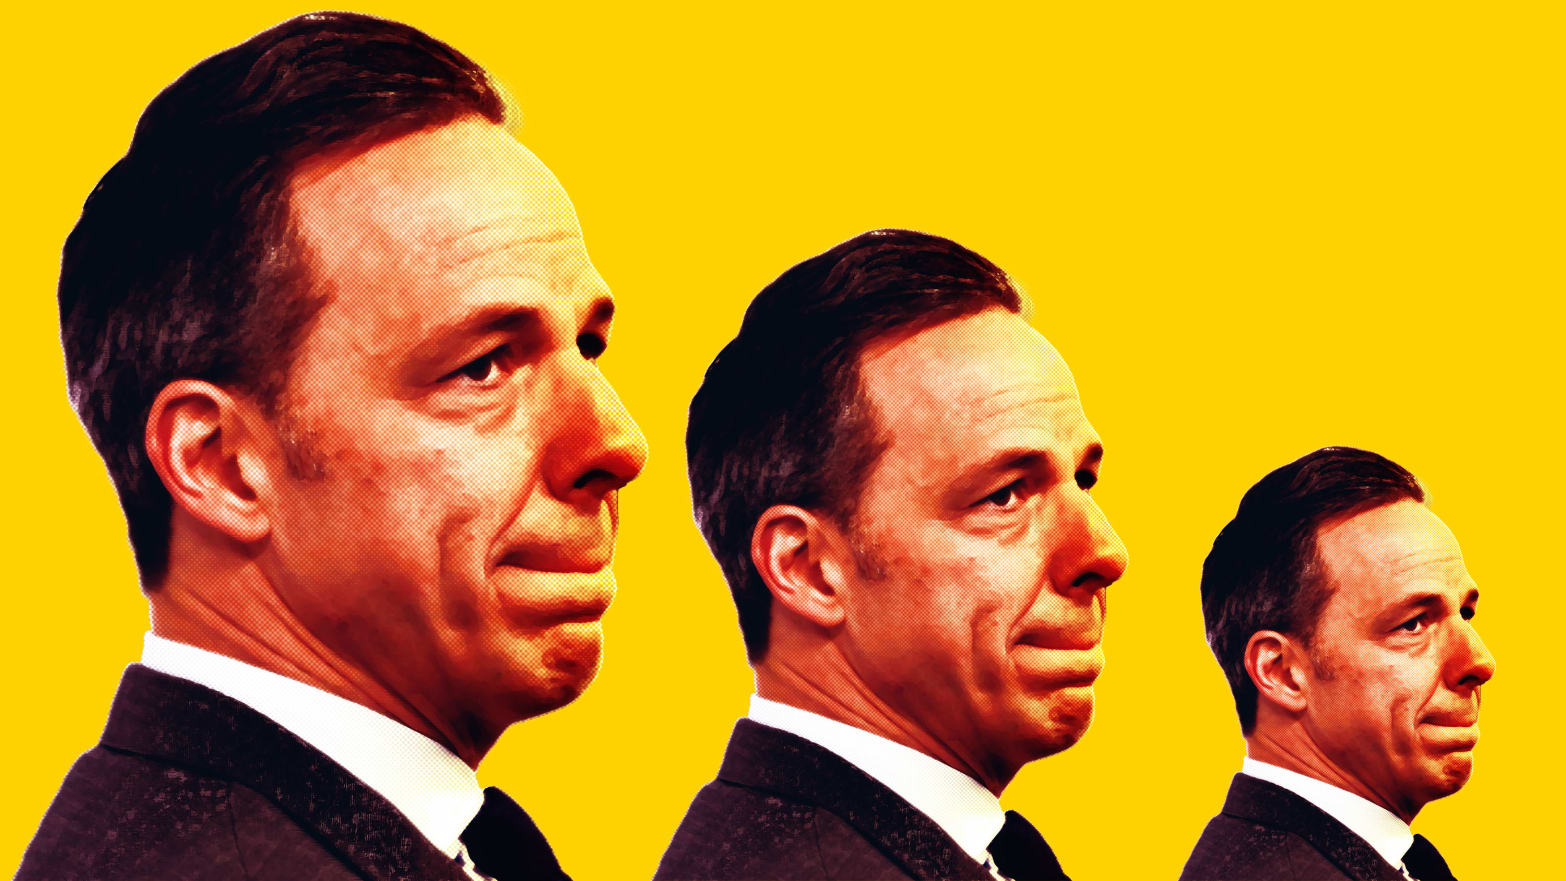 Photo illustration of Jake Tapper on a yellow background.